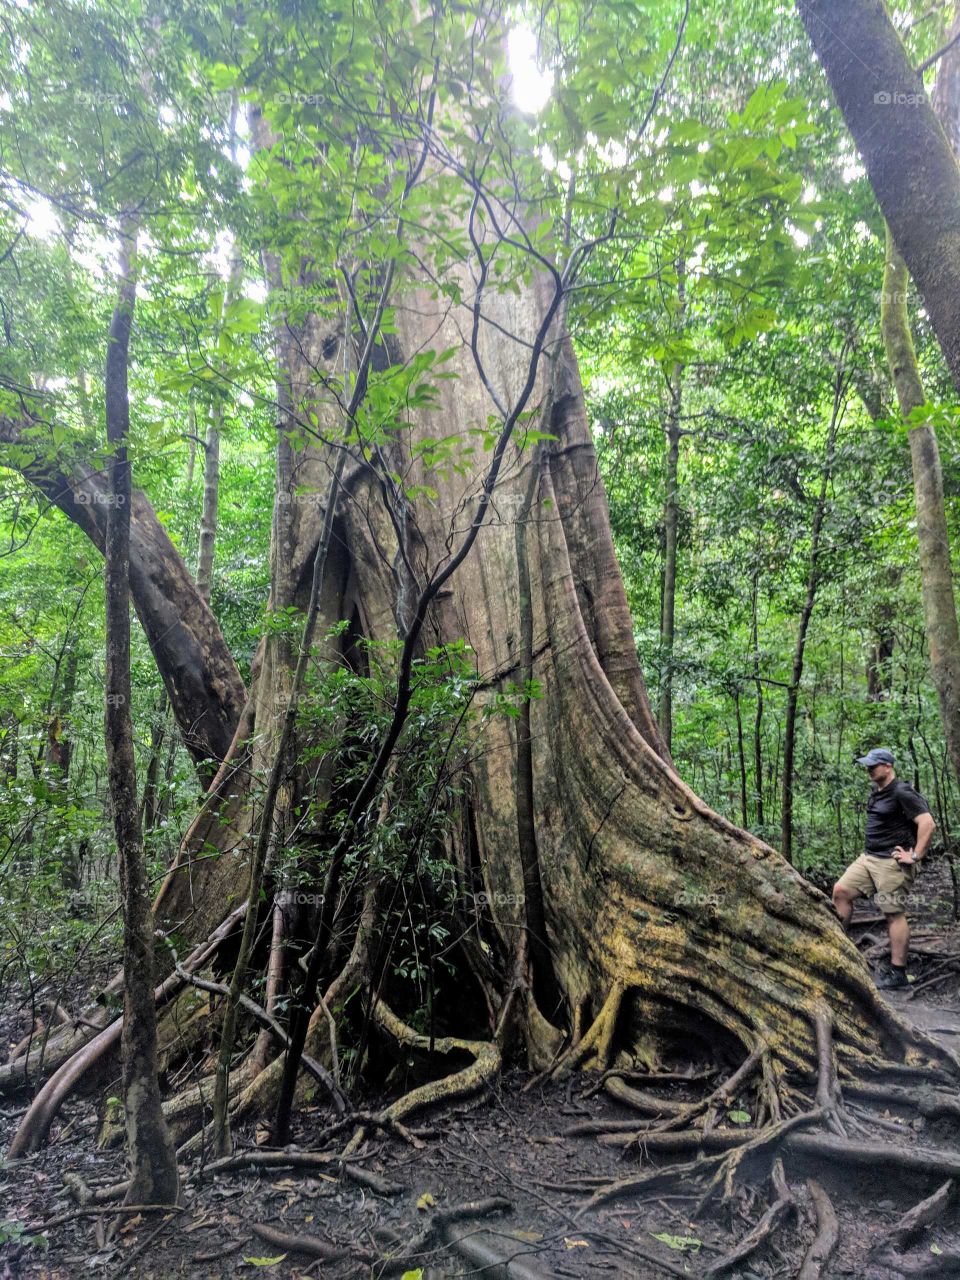 A man standing beside a very large tree in the rain forest